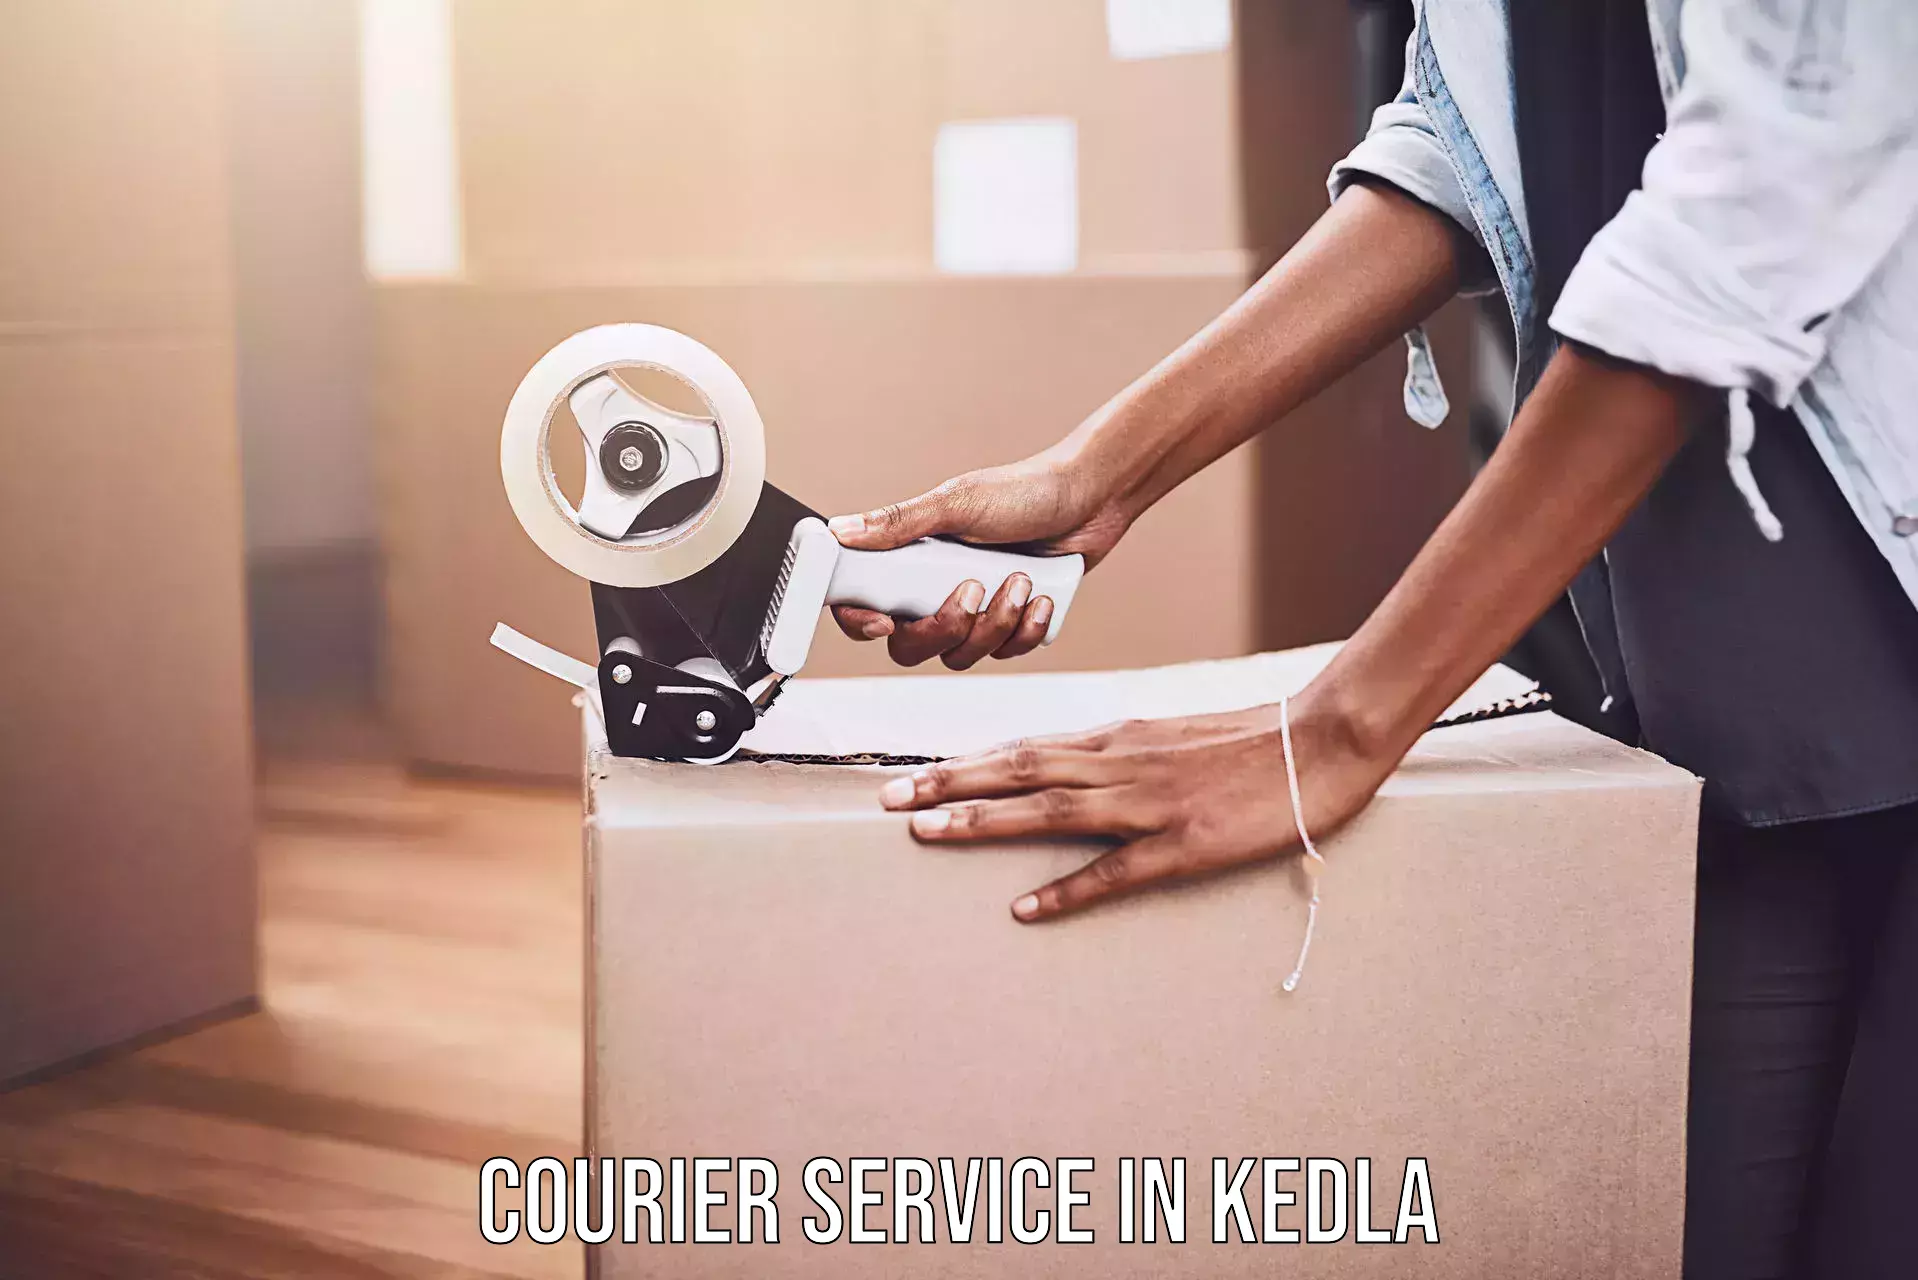 On-demand delivery in Kedla